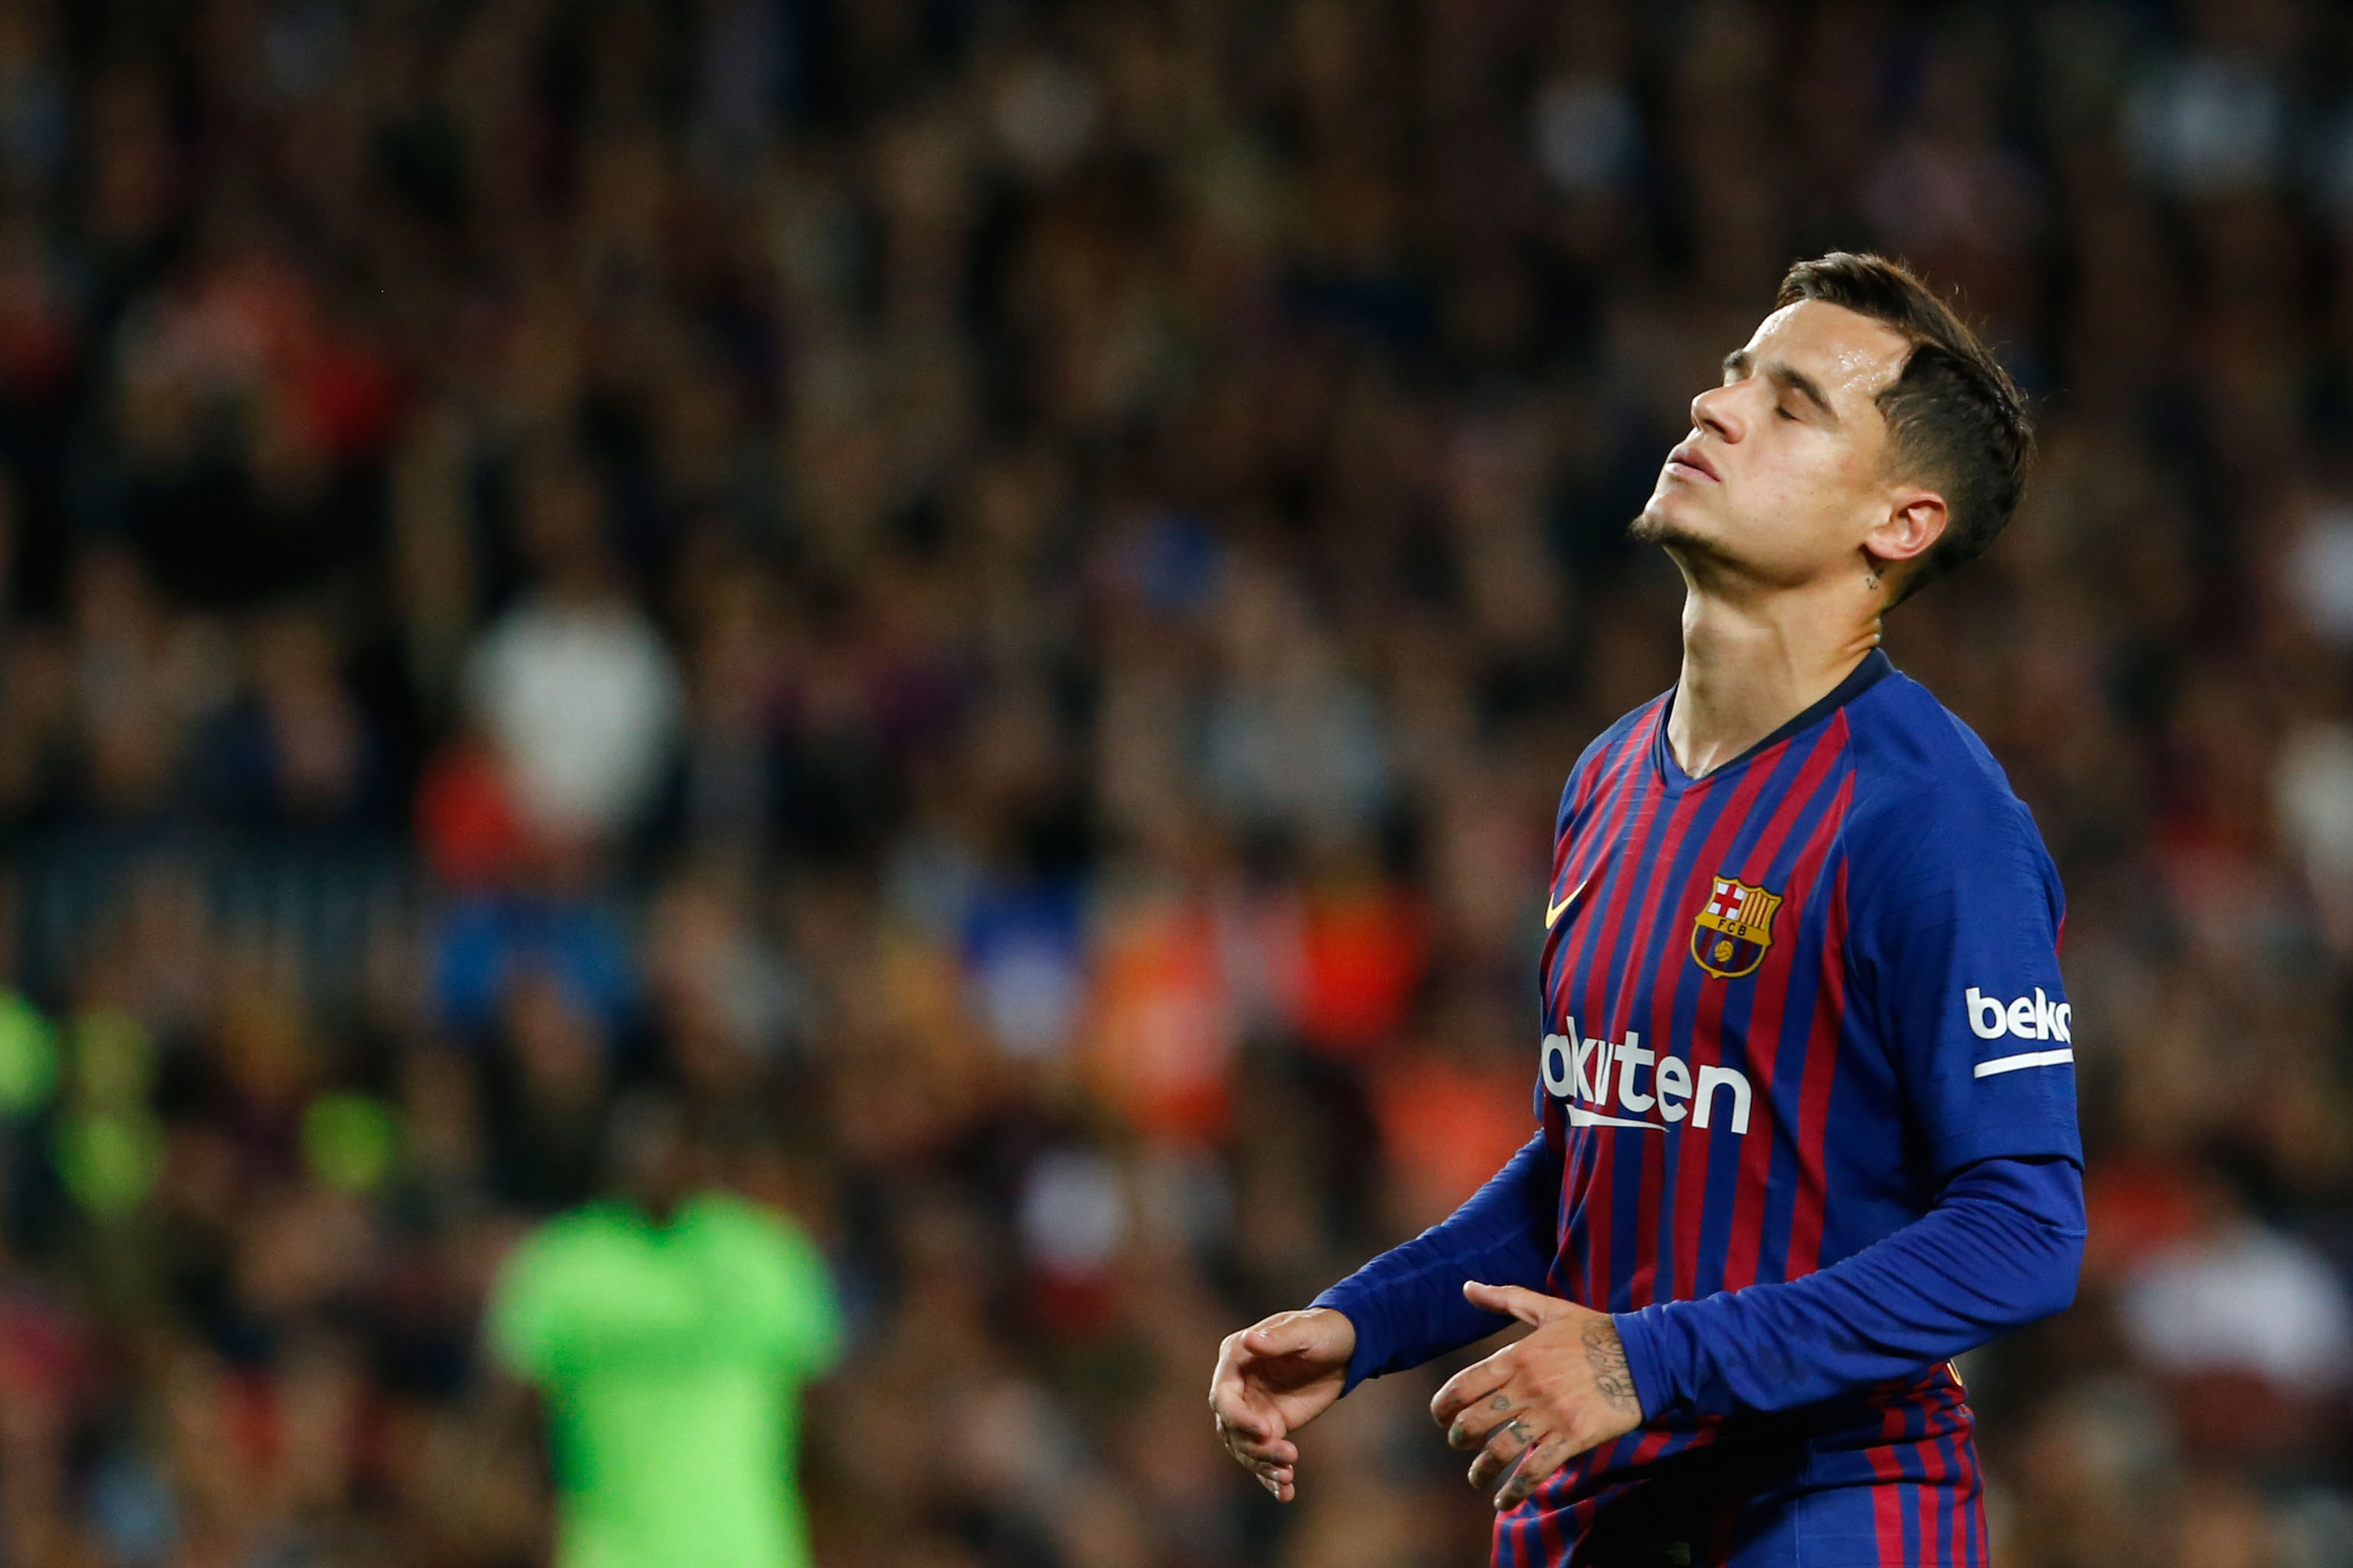 Philippe Coutinho remains at Barcelona despite adding very little, if at all, to the team. (Photo by Pau Barrena/AFP/Getty Images)